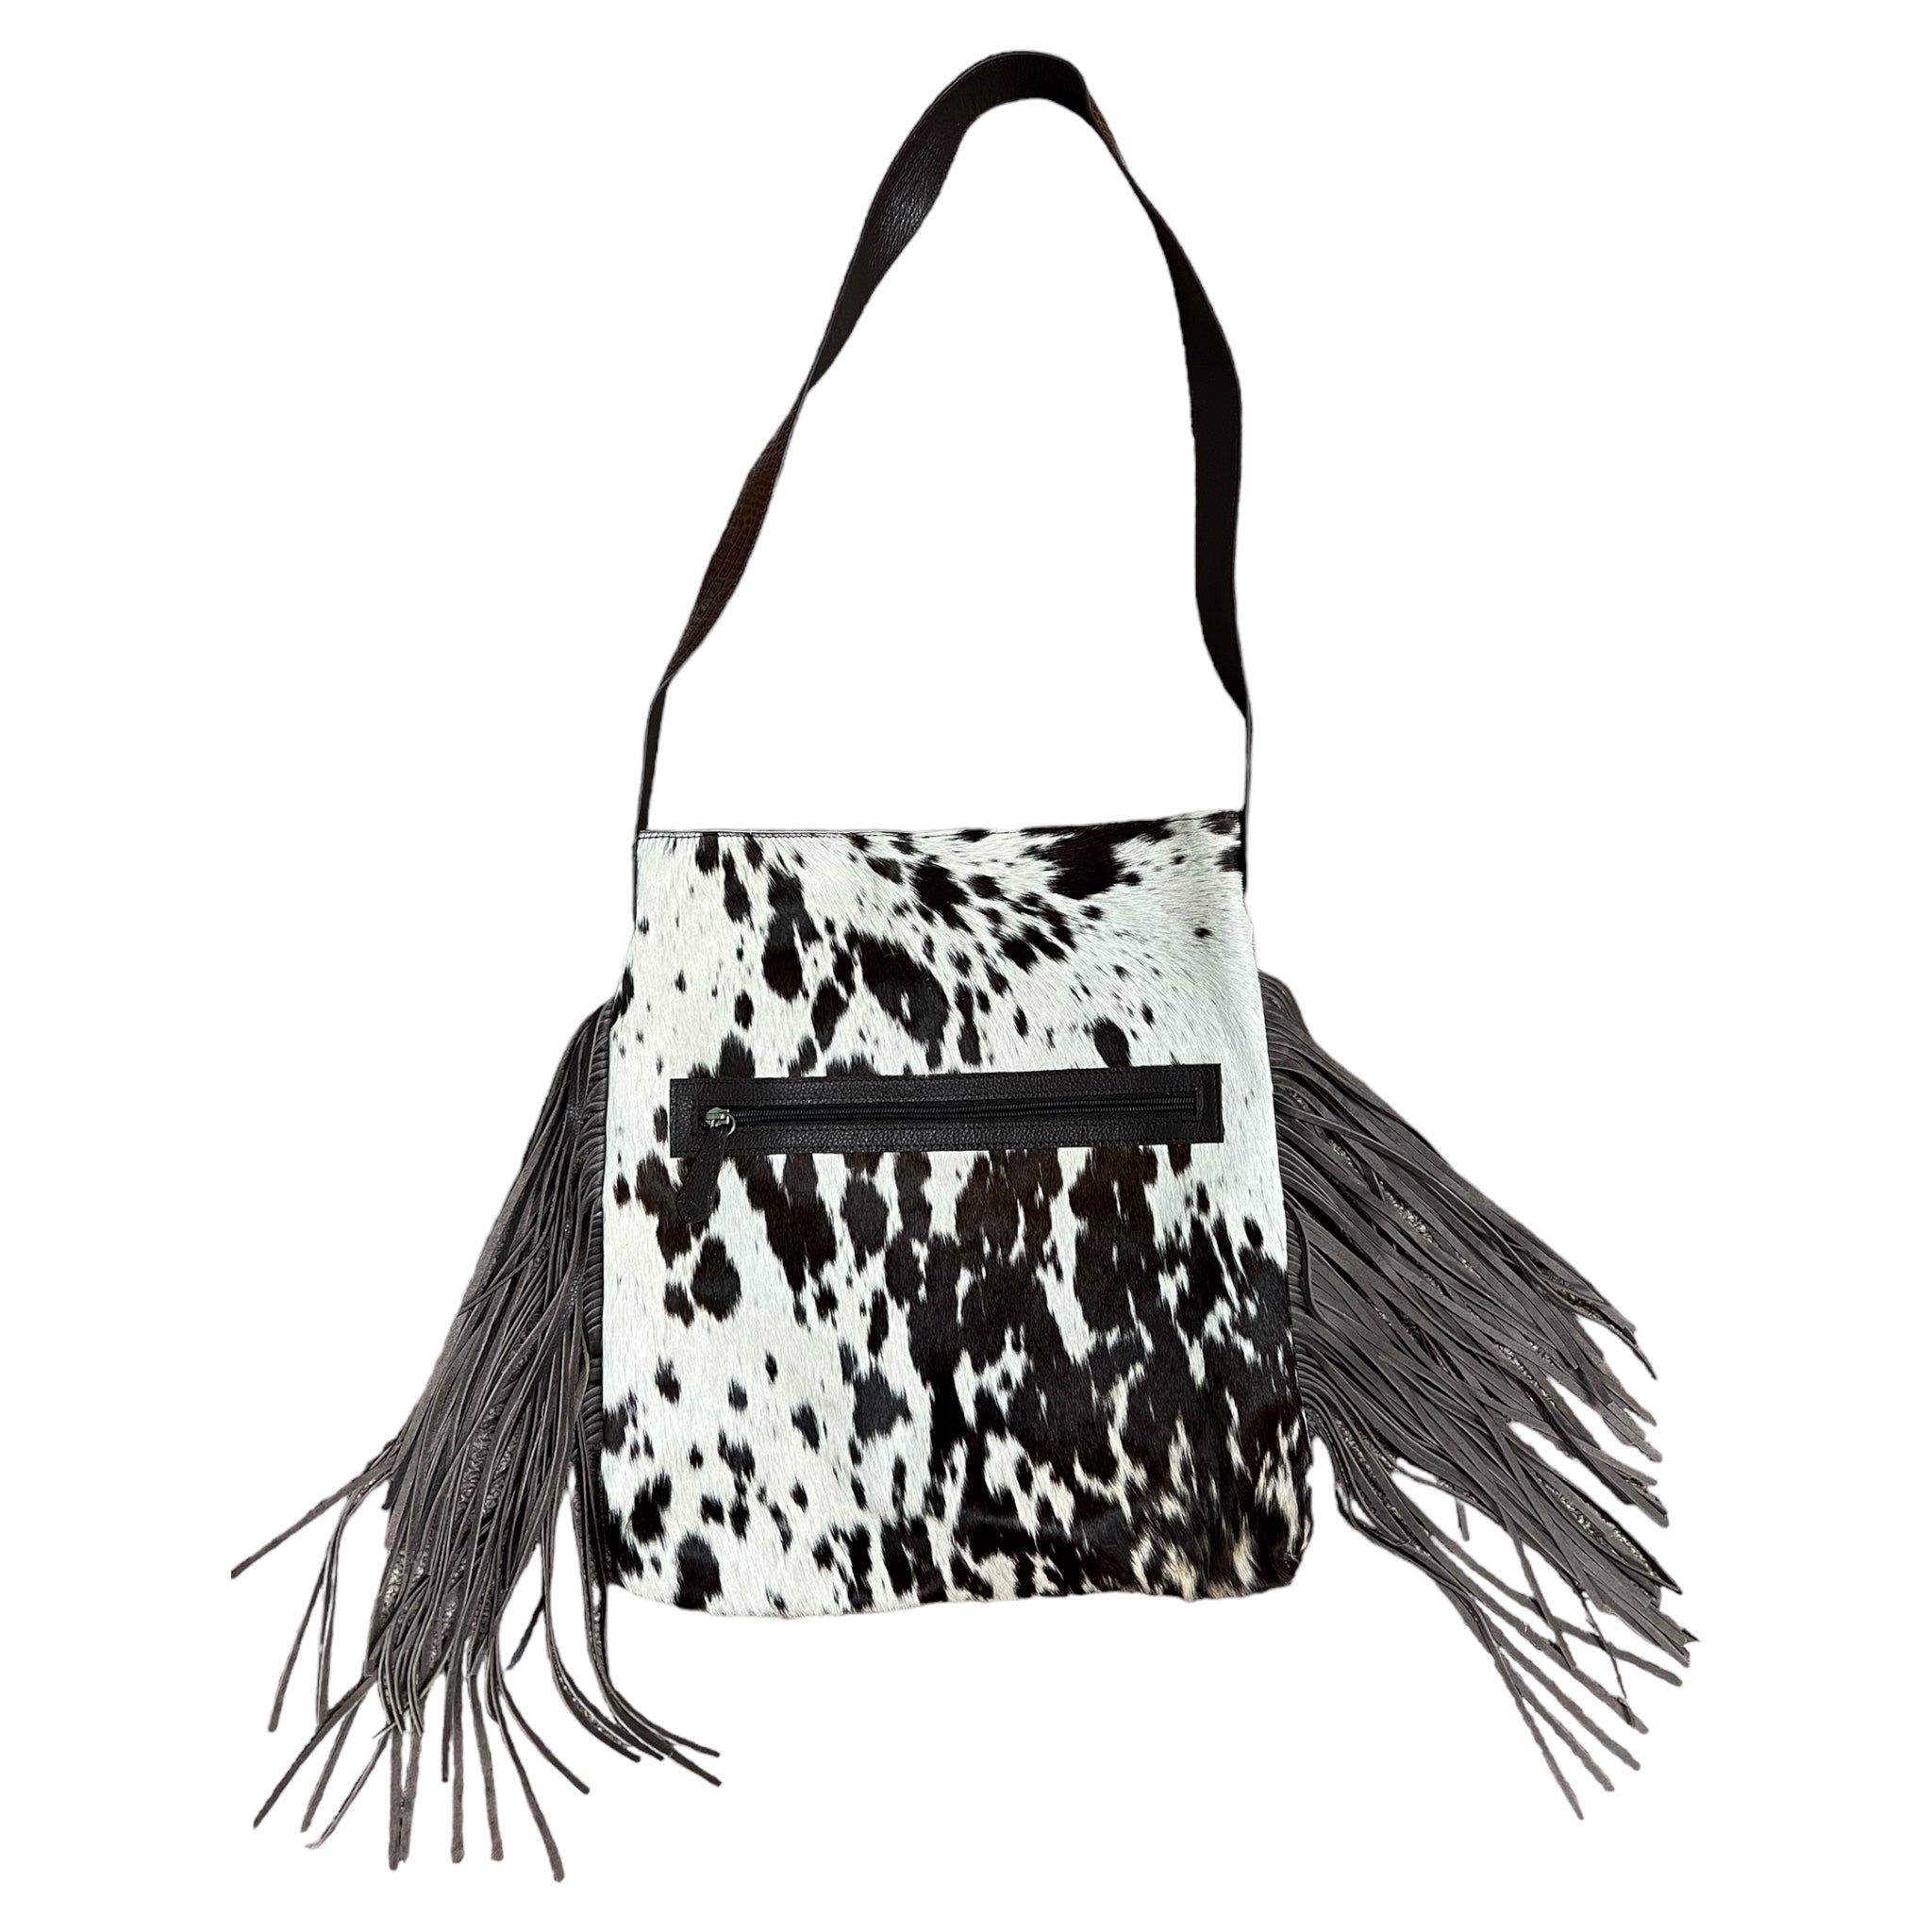 Cowhide bag with fringes - Rodeo Cowhide Rugs